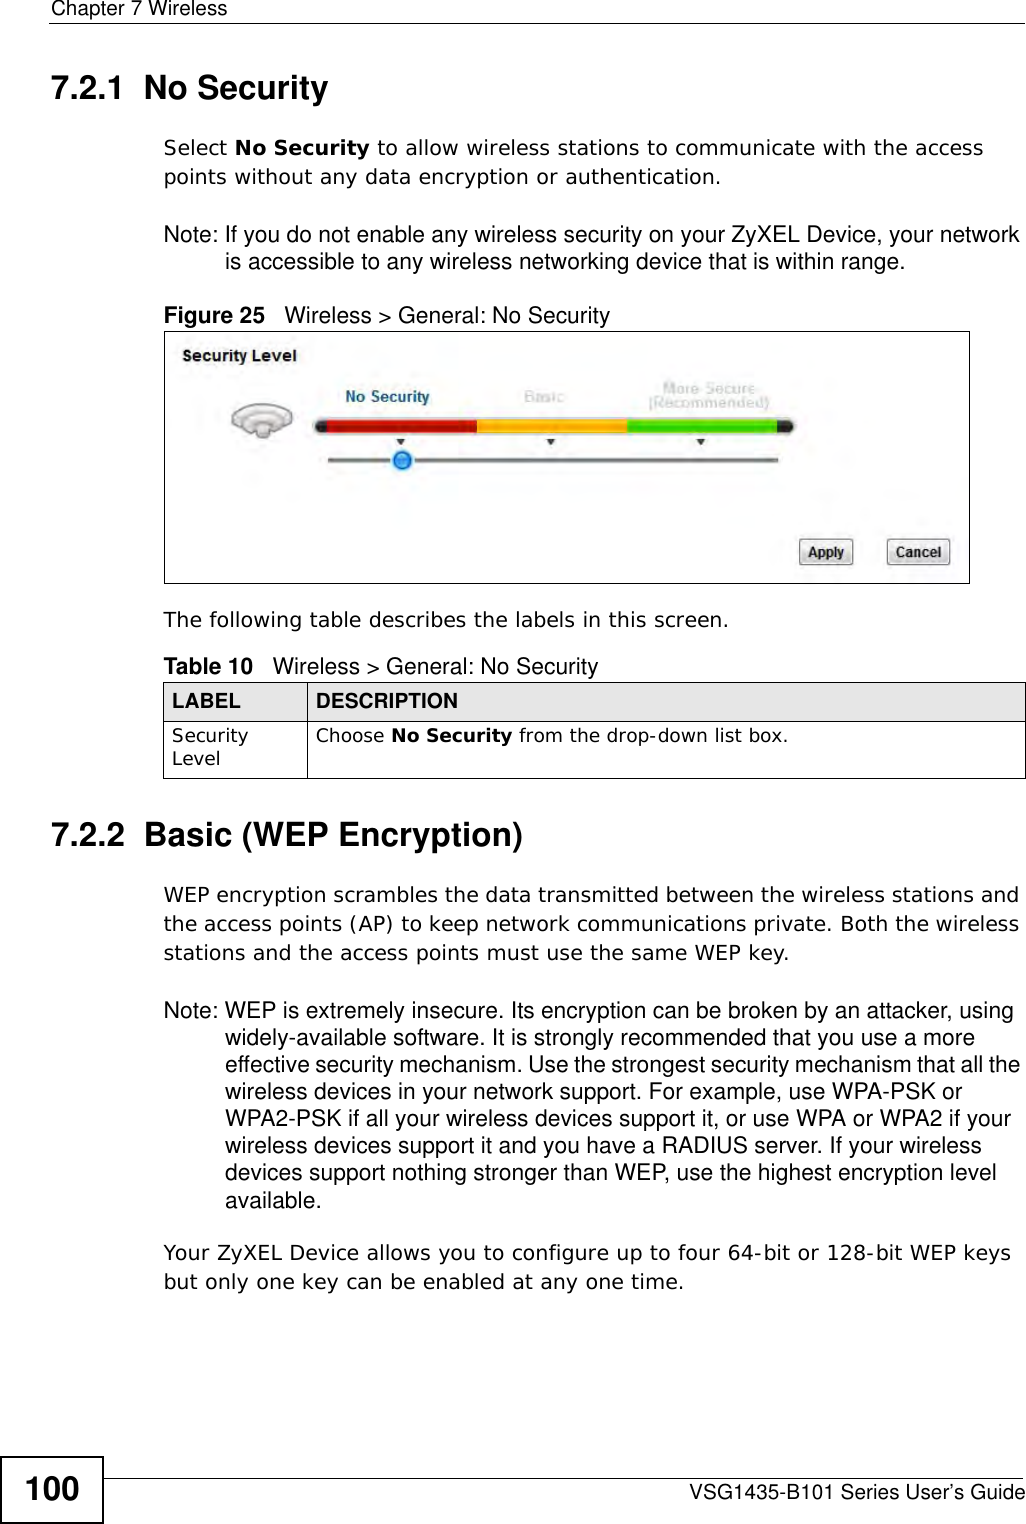 Chapter 7 WirelessVSG1435-B101 Series User’s Guide1007.2.1  No SecuritySelect No Security to allow wireless stations to communicate with the access points without any data encryption or authentication.Note: If you do not enable any wireless security on your ZyXEL Device, your network is accessible to any wireless networking device that is within range.Figure 25   Wireless &gt; General: No SecurityThe following table describes the labels in this screen.7.2.2  Basic (WEP Encryption)WEP encryption scrambles the data transmitted between the wireless stations and the access points (AP) to keep network communications private. Both the wireless stations and the access points must use the same WEP key.Note: WEP is extremely insecure. Its encryption can be broken by an attacker, using widely-available software. It is strongly recommended that you use a more effective security mechanism. Use the strongest security mechanism that all the wireless devices in your network support. For example, use WPA-PSK or WPA2-PSK if all your wireless devices support it, or use WPA or WPA2 if your wireless devices support it and you have a RADIUS server. If your wireless devices support nothing stronger than WEP, use the highest encryption level available.Your ZyXEL Device allows you to configure up to four 64-bit or 128-bit WEP keys but only one key can be enabled at any one time.Table 10   Wireless &gt; General: No SecurityLABEL DESCRIPTIONSecurity Level Choose No Security from the drop-down list box.